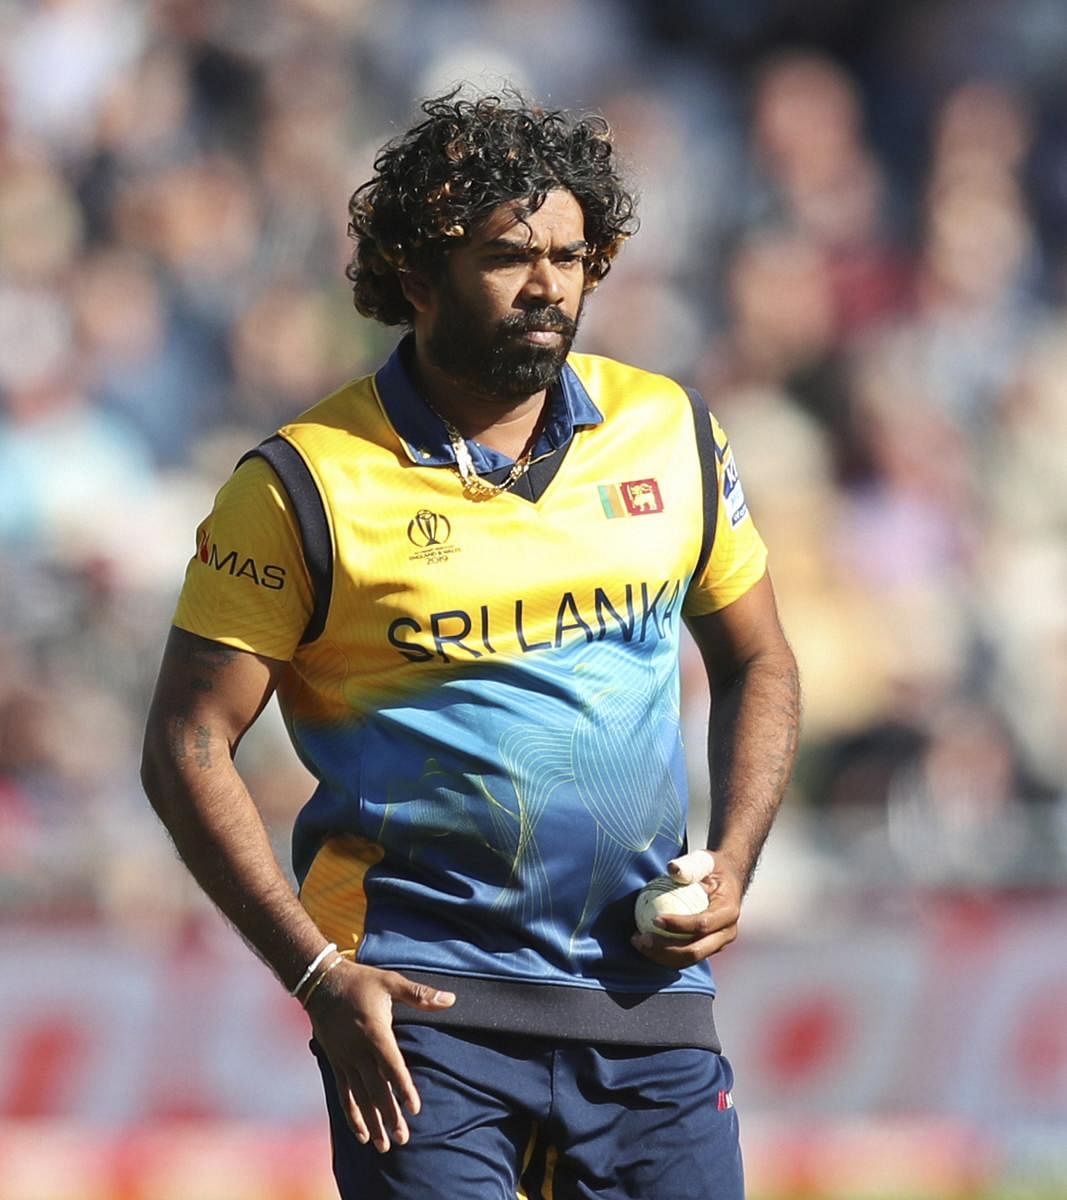 FIGHTER: Veteran Sri Lanka pacer Lasith Malinga says there's still some gas left in his tank and wants to play next year's World T20 in Australia. AP/ PTI